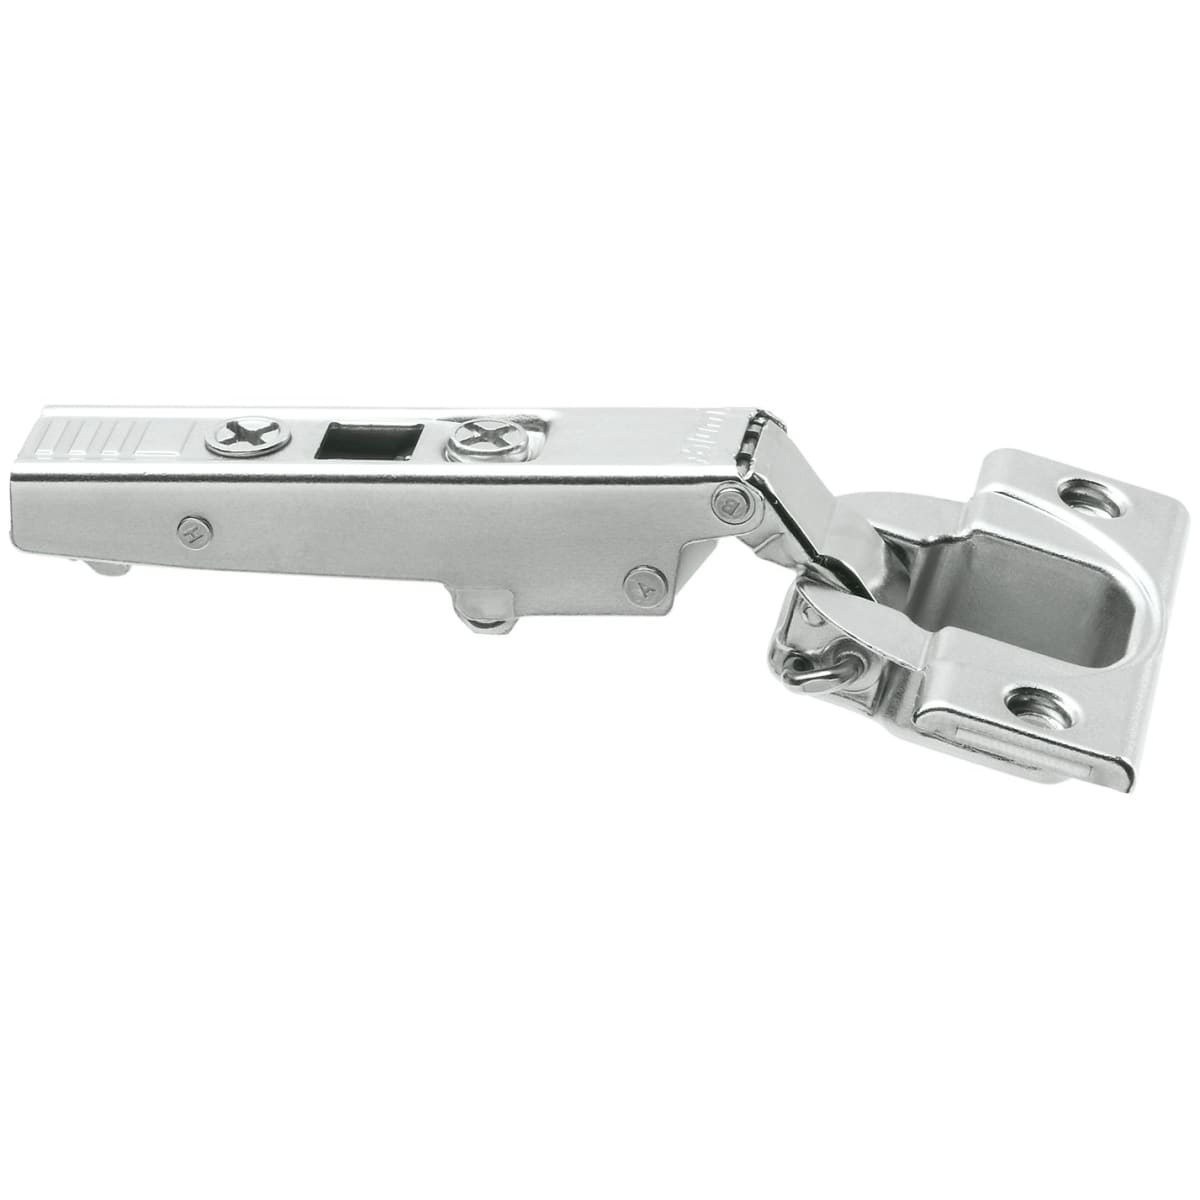 Blum 71t3550 Chrome 110 Degree Full Overlay Hinge With Self Close And On Installation Pulirect Com